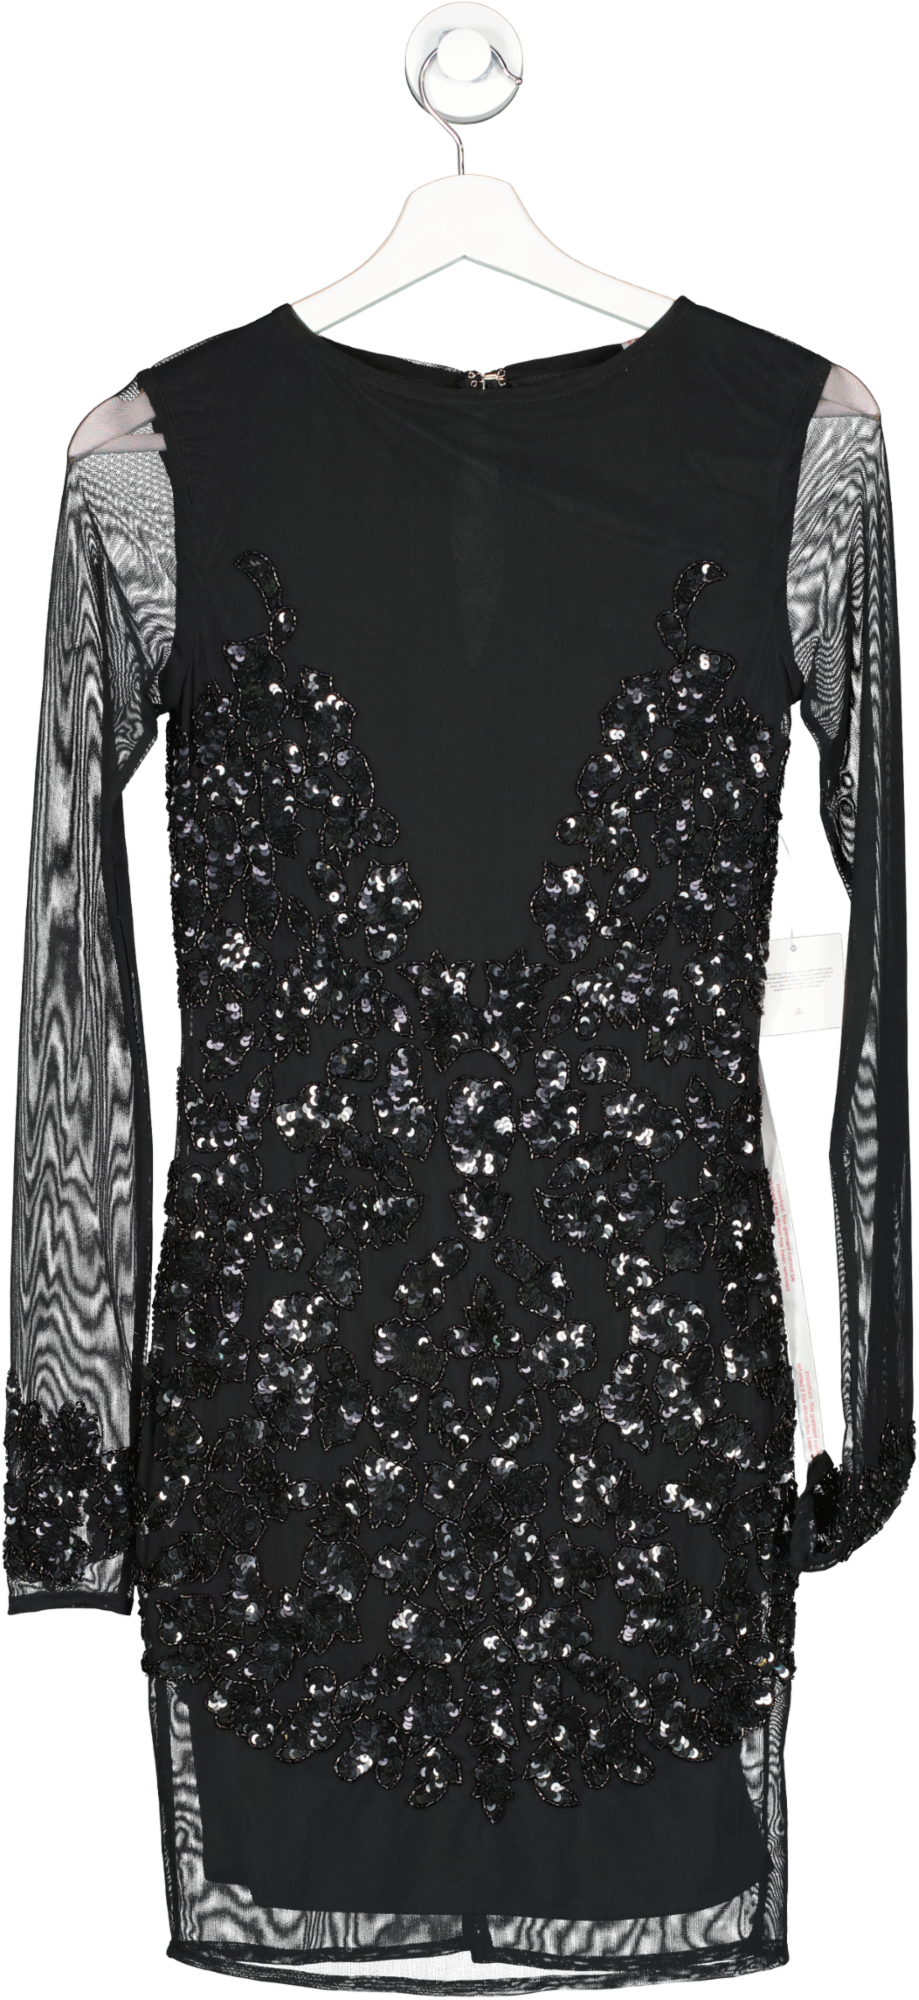 Missguided Black Peace And Love Embellished Scoop Neck Bodycon Dress UK 6